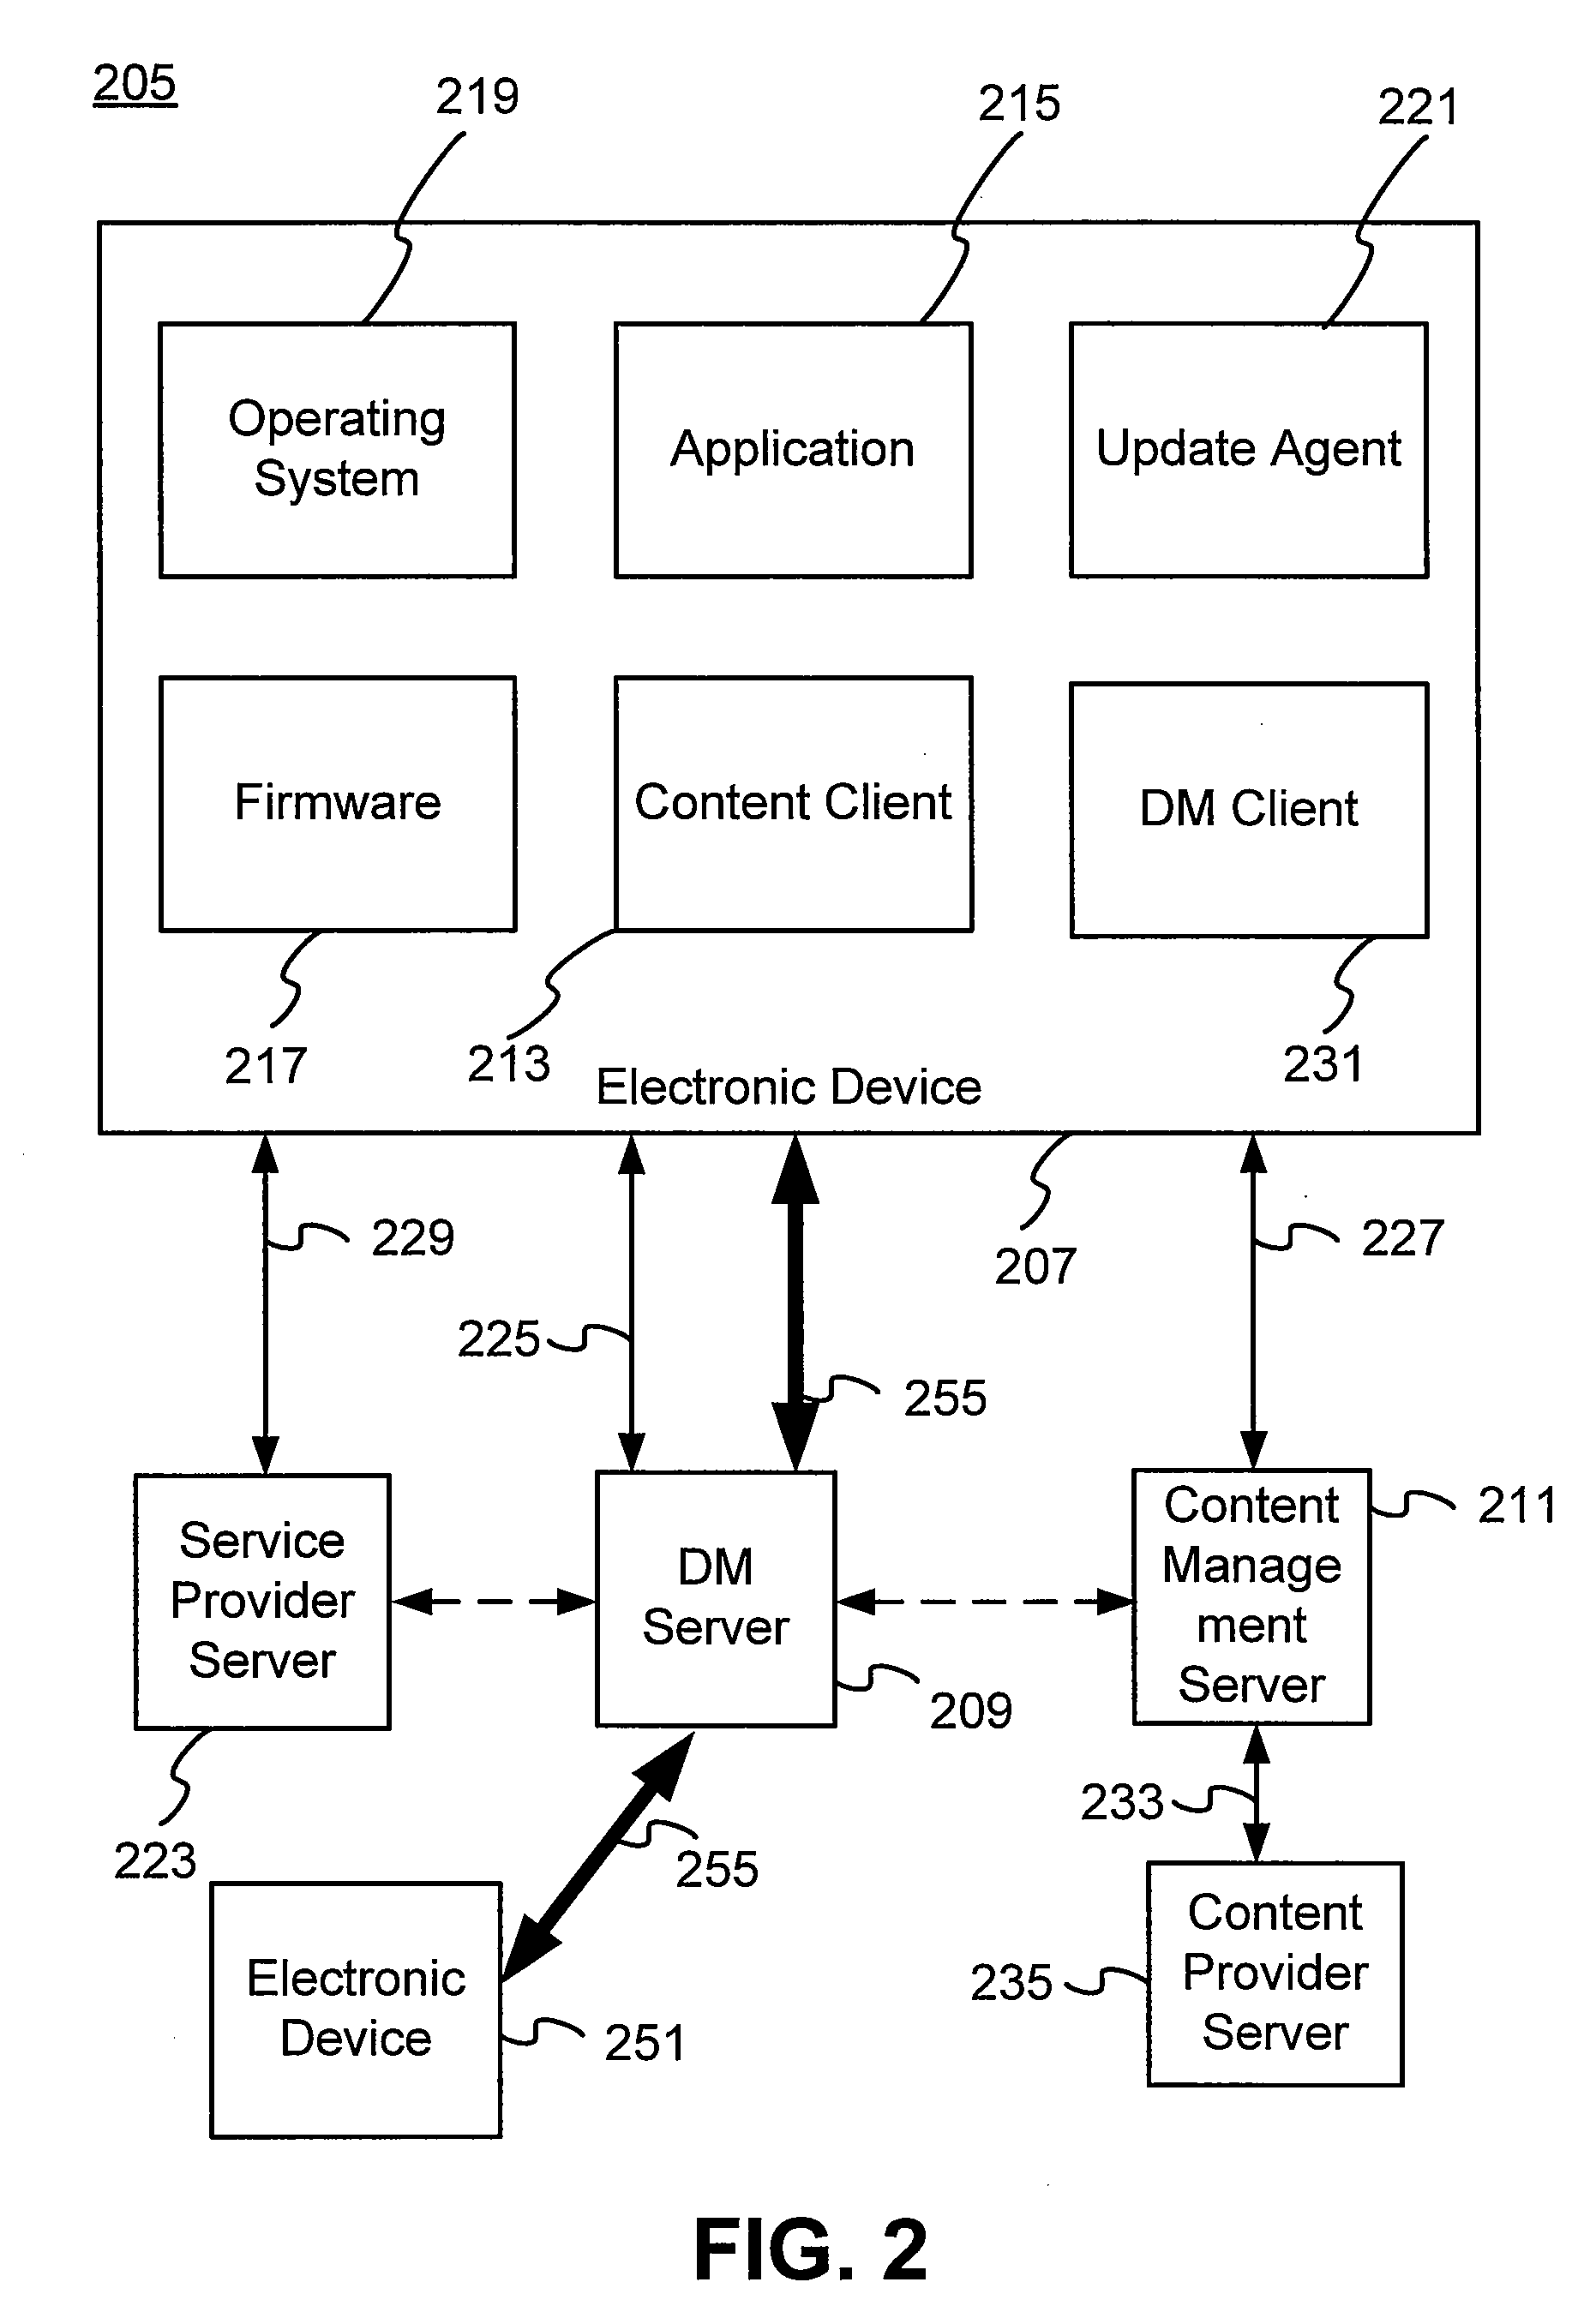 Device Management System For Mobile Devices That Supports Multiple-Point Transport